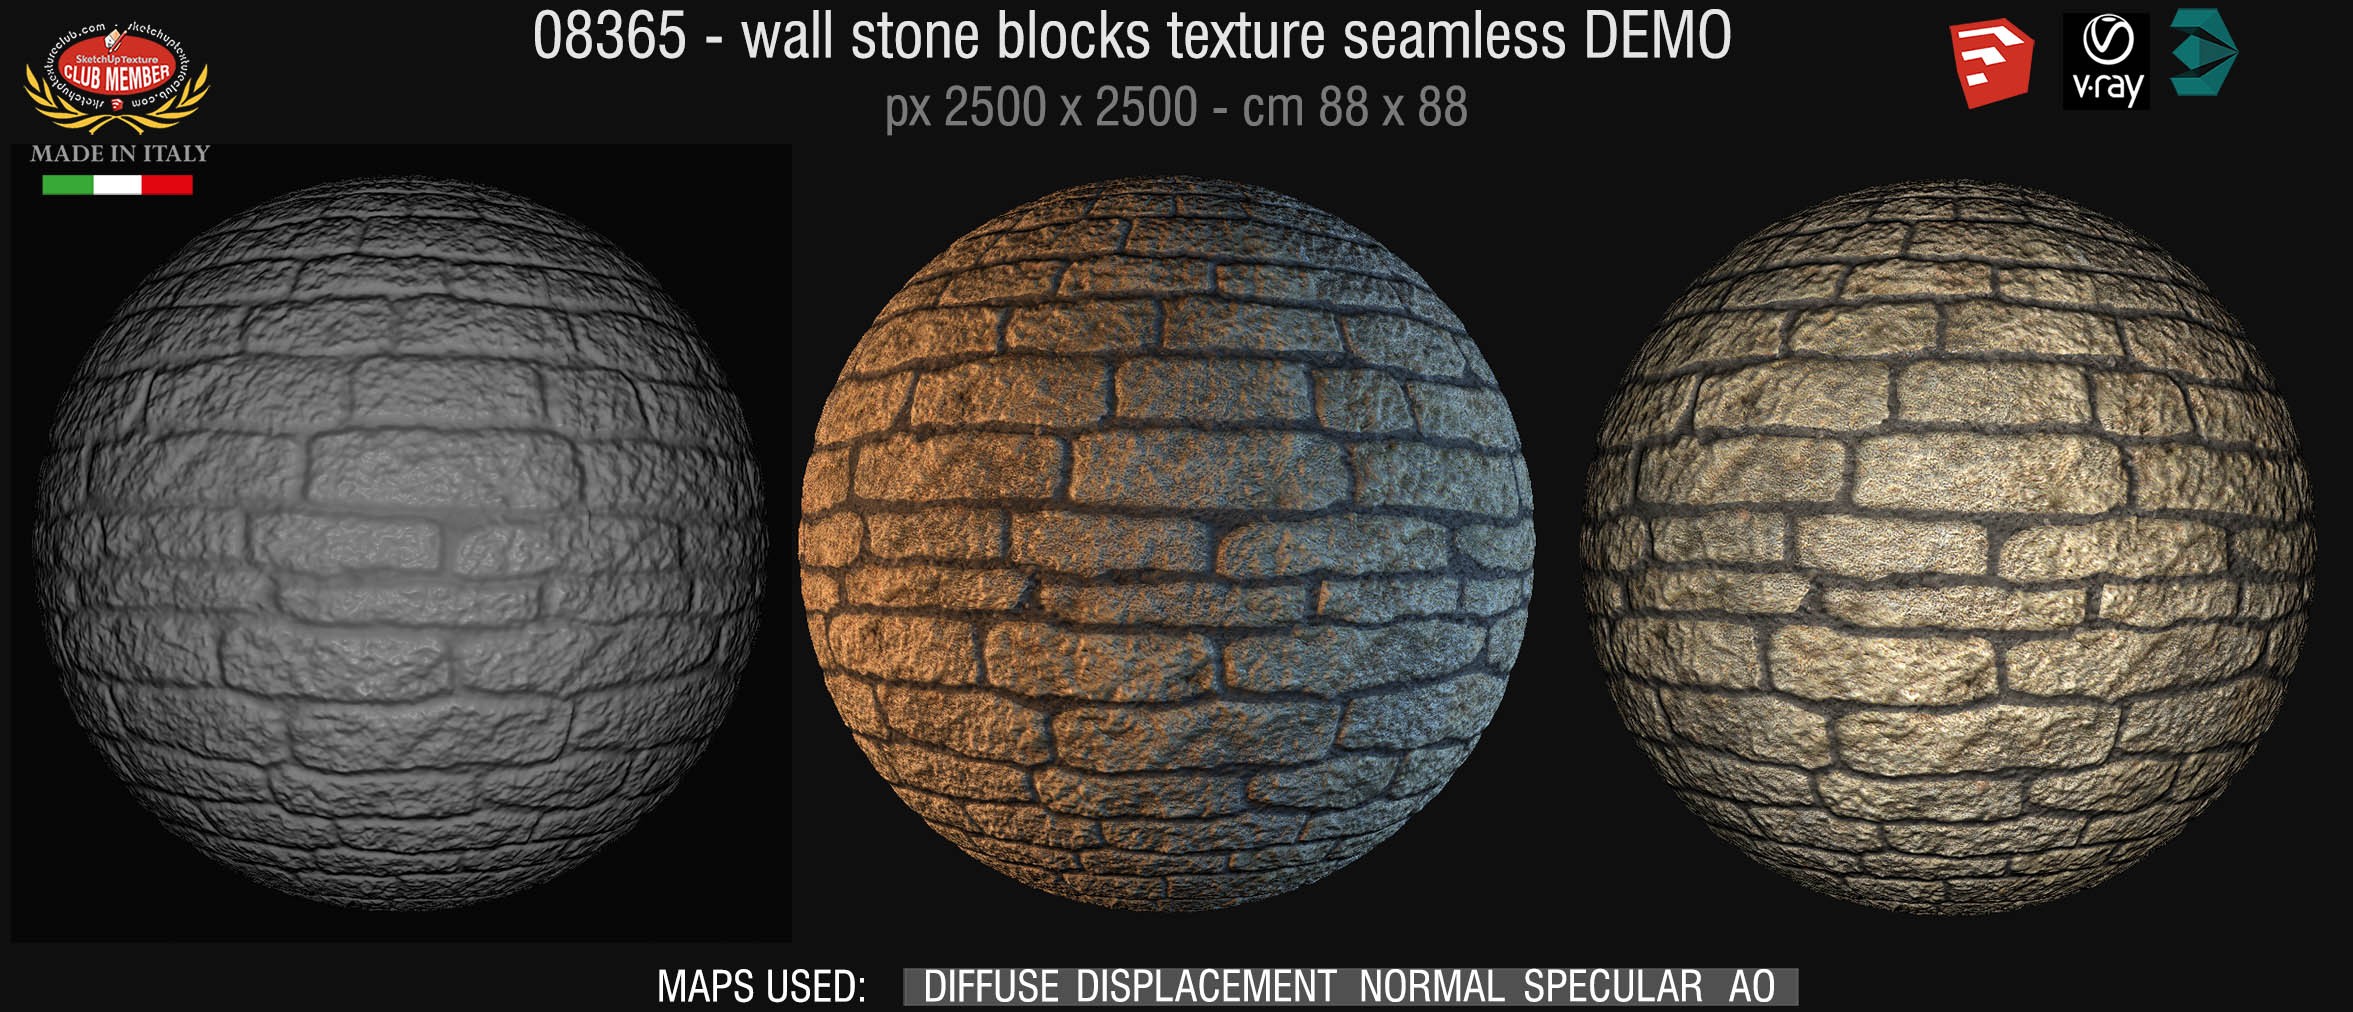 08365 HR Wall stone with regular blocks texture + maps DEMO